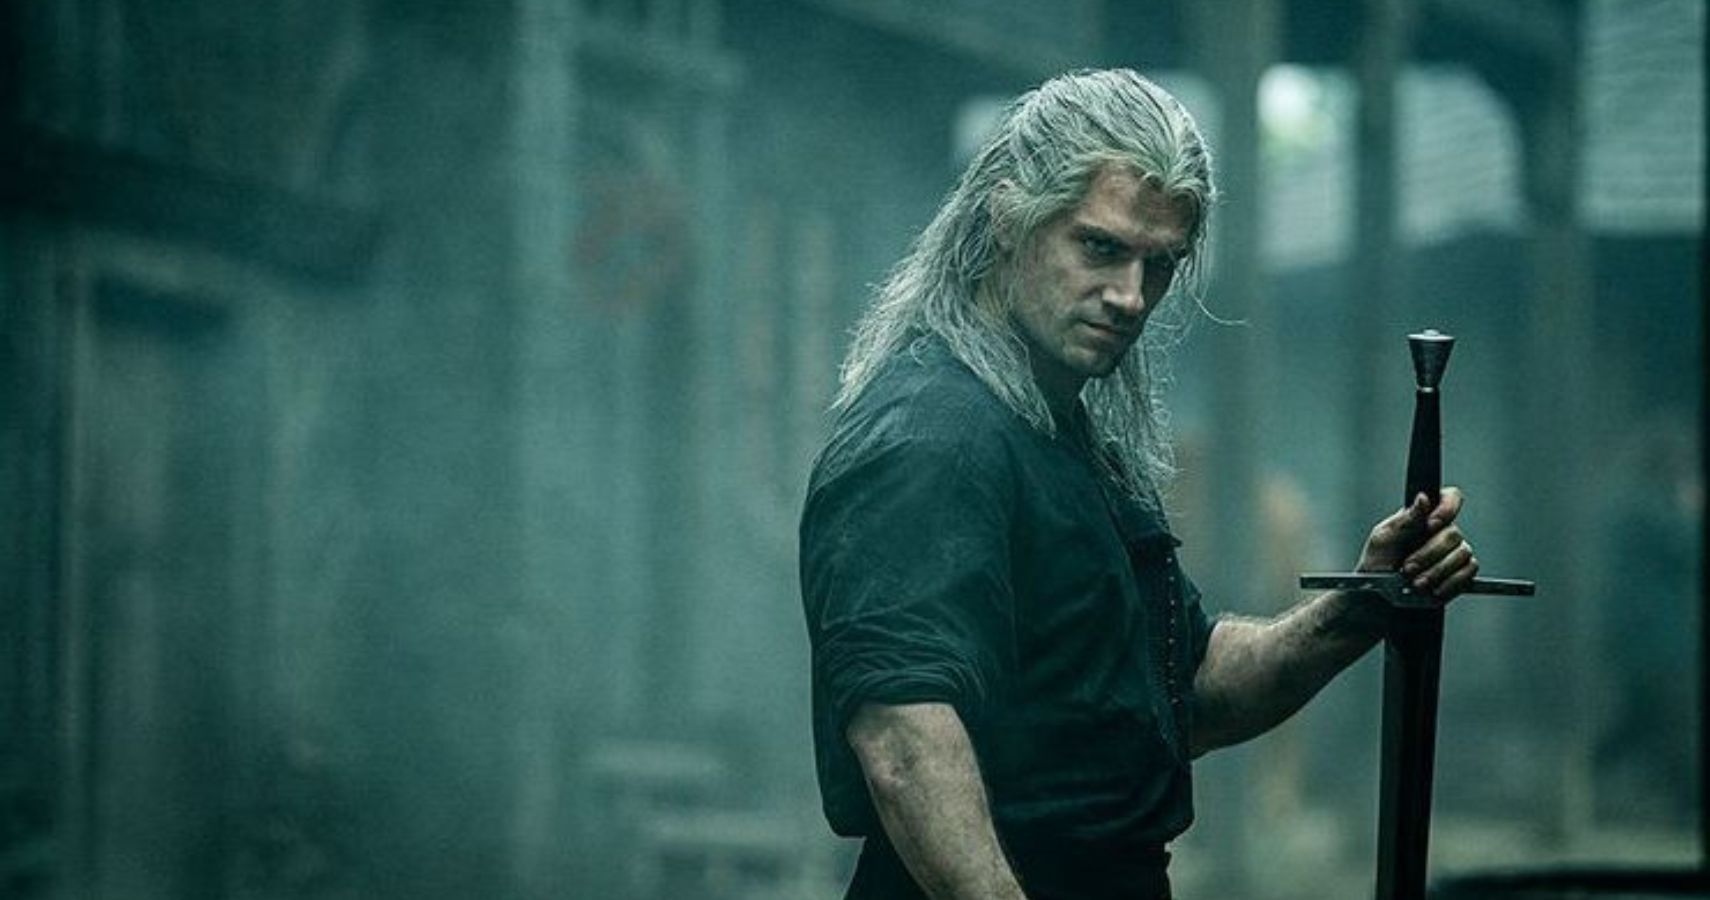 Henry Cavill Returns To Filming The Witcher Season 2 After Injury